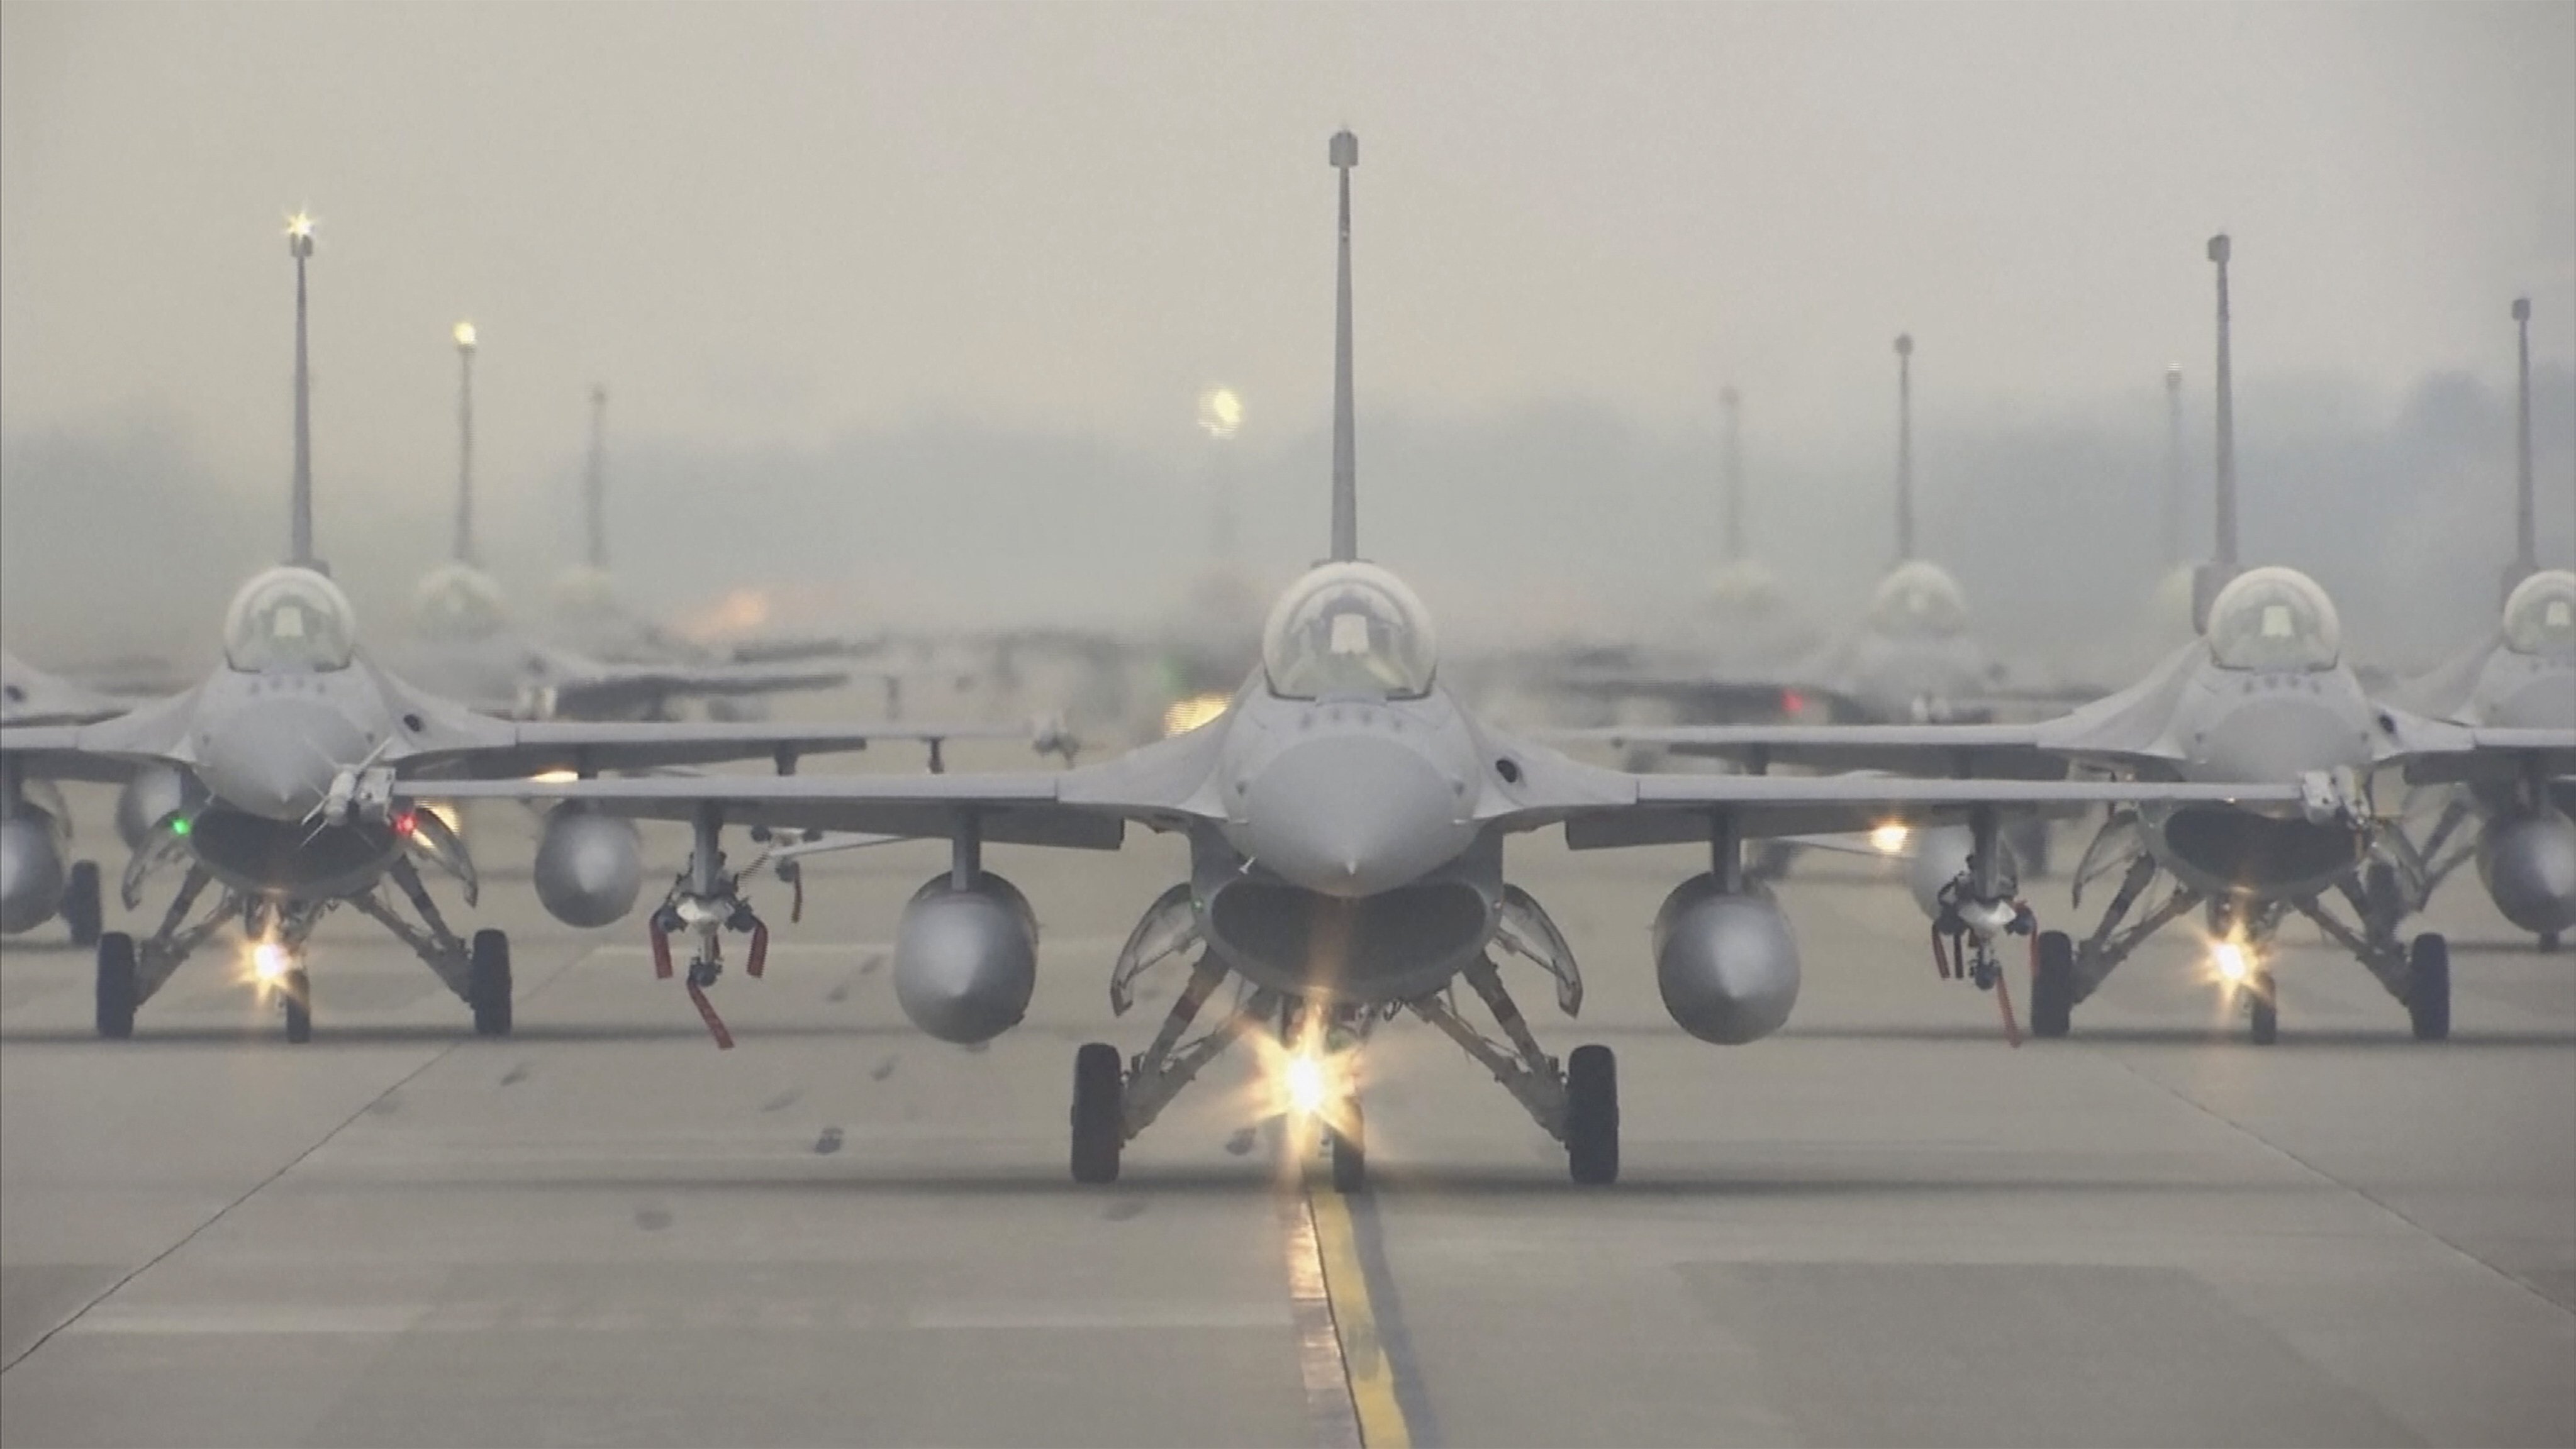 Taiwanese air force F-16V fighter jets taxi along a runway during a drill in Chiayi in southwestern Taiwan, on Wednesday, January 5, 2022. Taiwan’s Air Force pilots took part in a drill to simulate an interception of mainland aircraft into Taiwan’s ADIZ. Photo: AP Photo